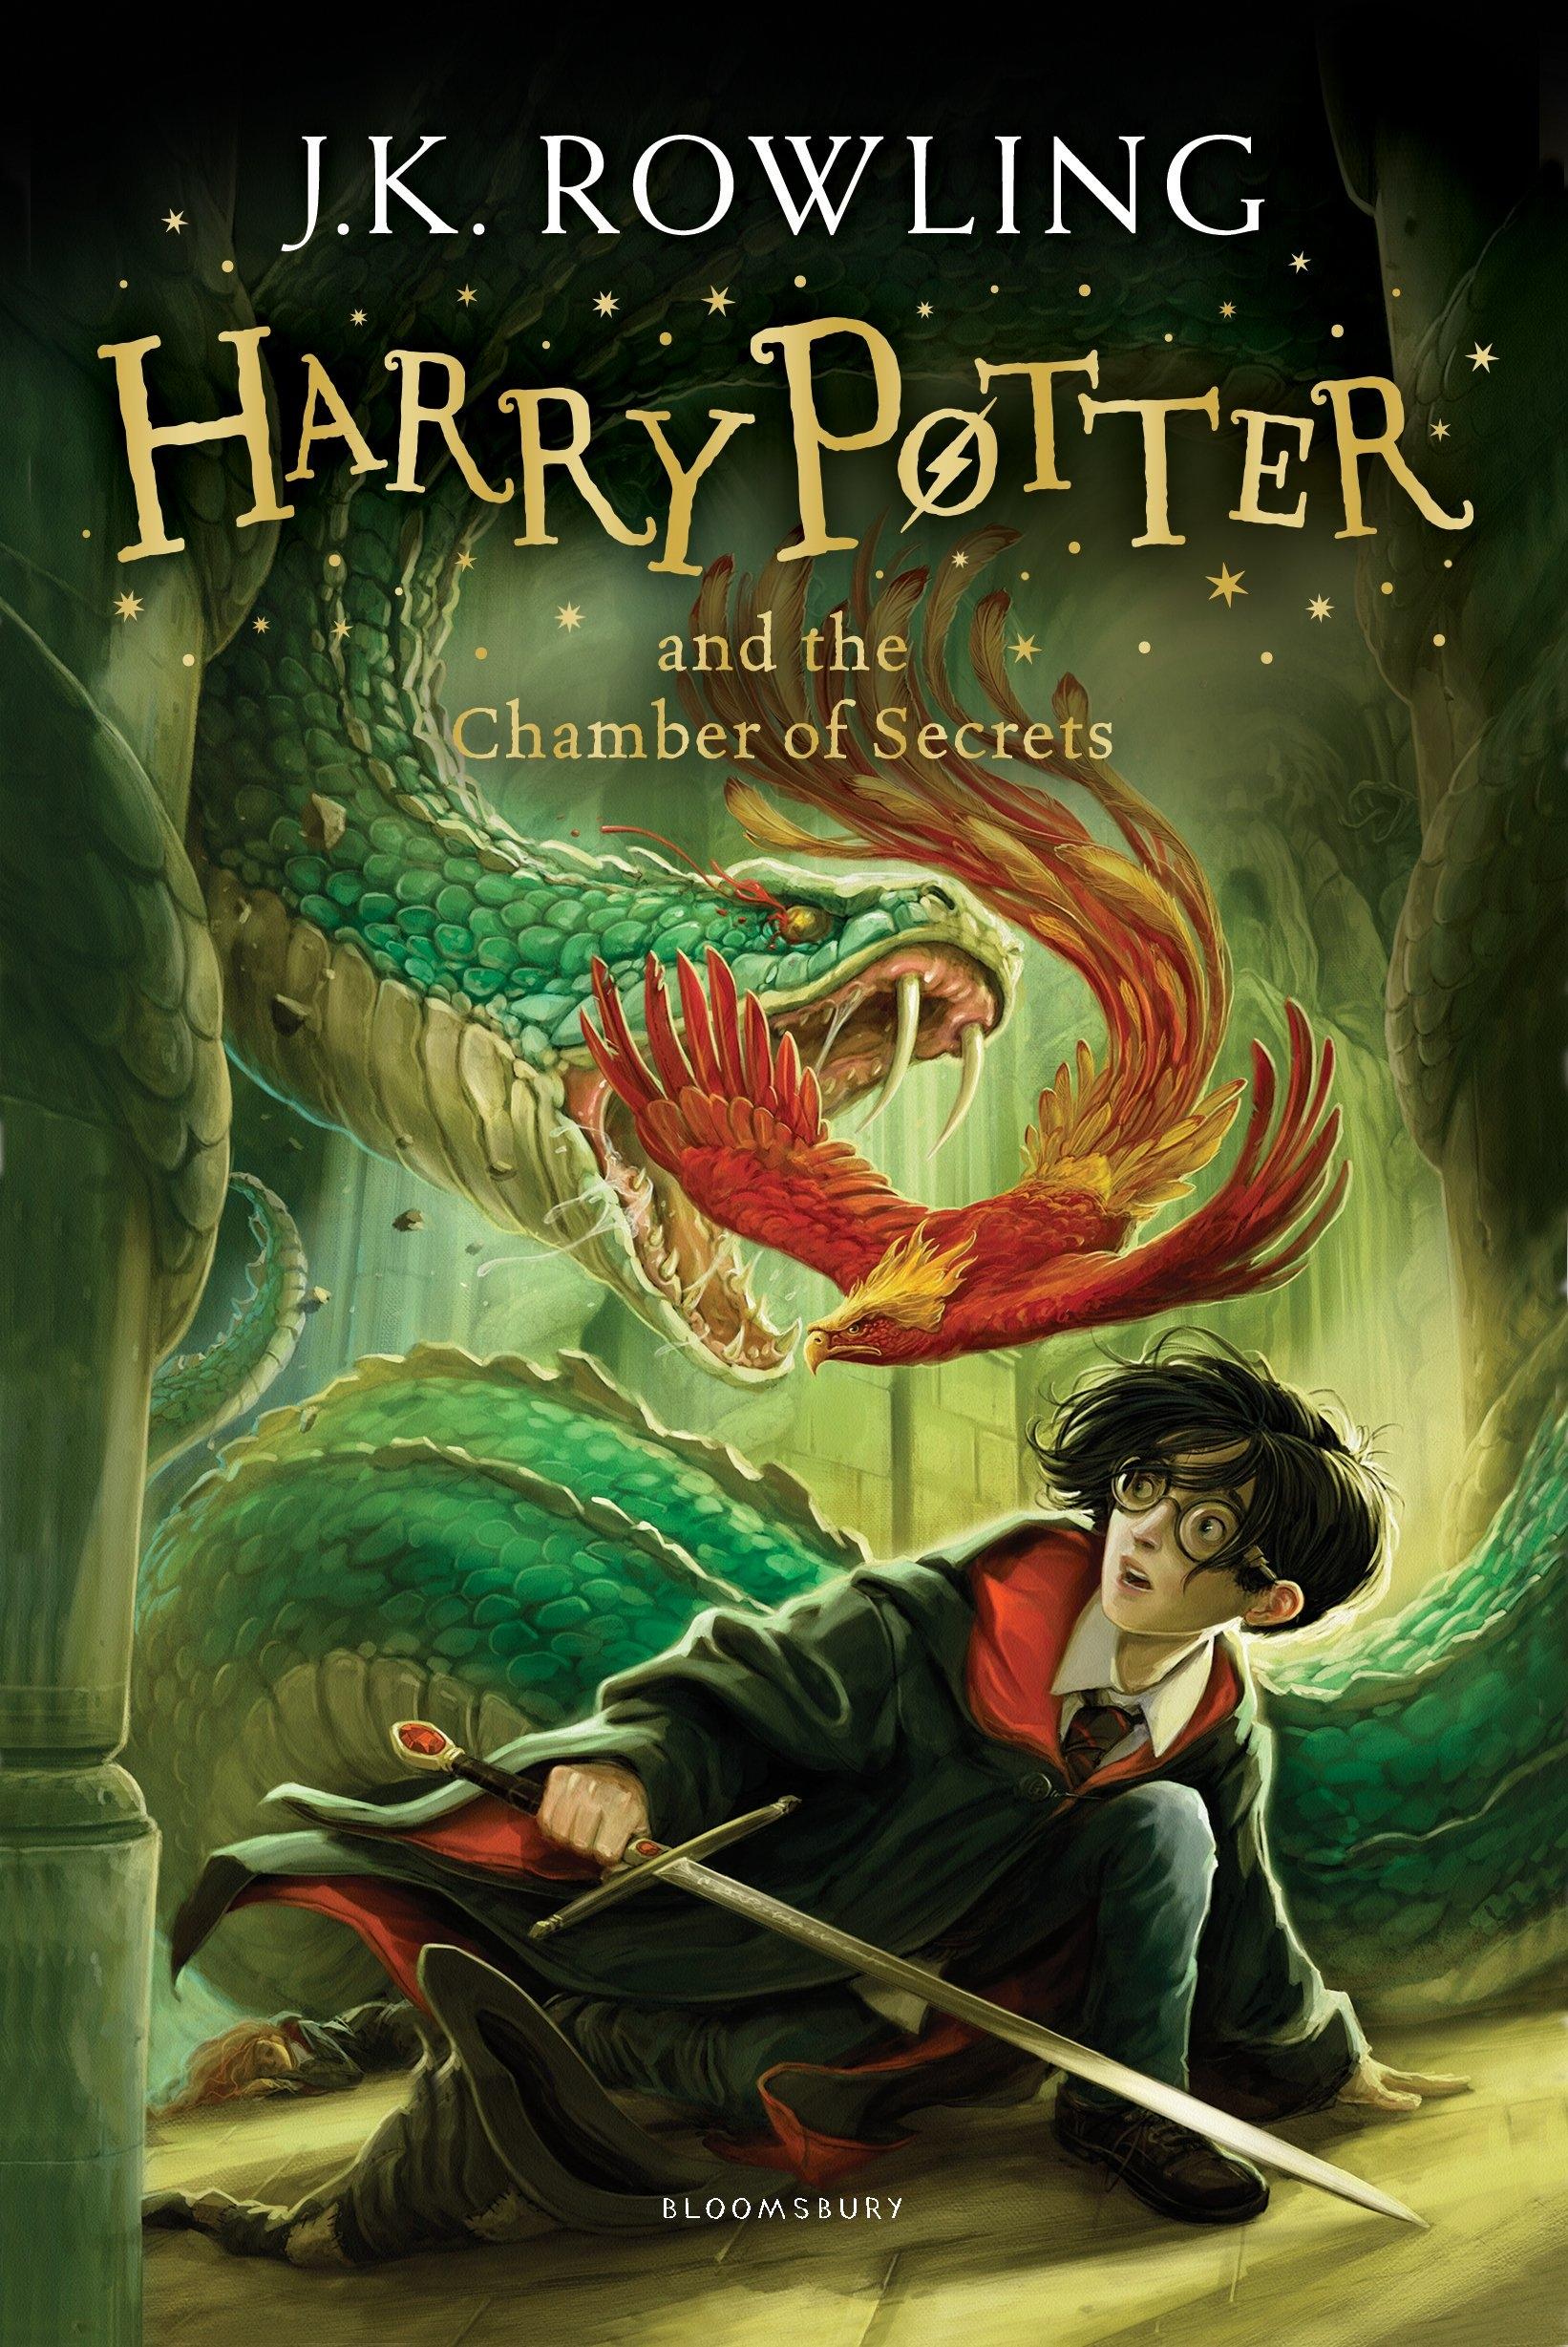 Harry Potter And The Chamber Of Secrets (Inglés) "Tomo 2". 